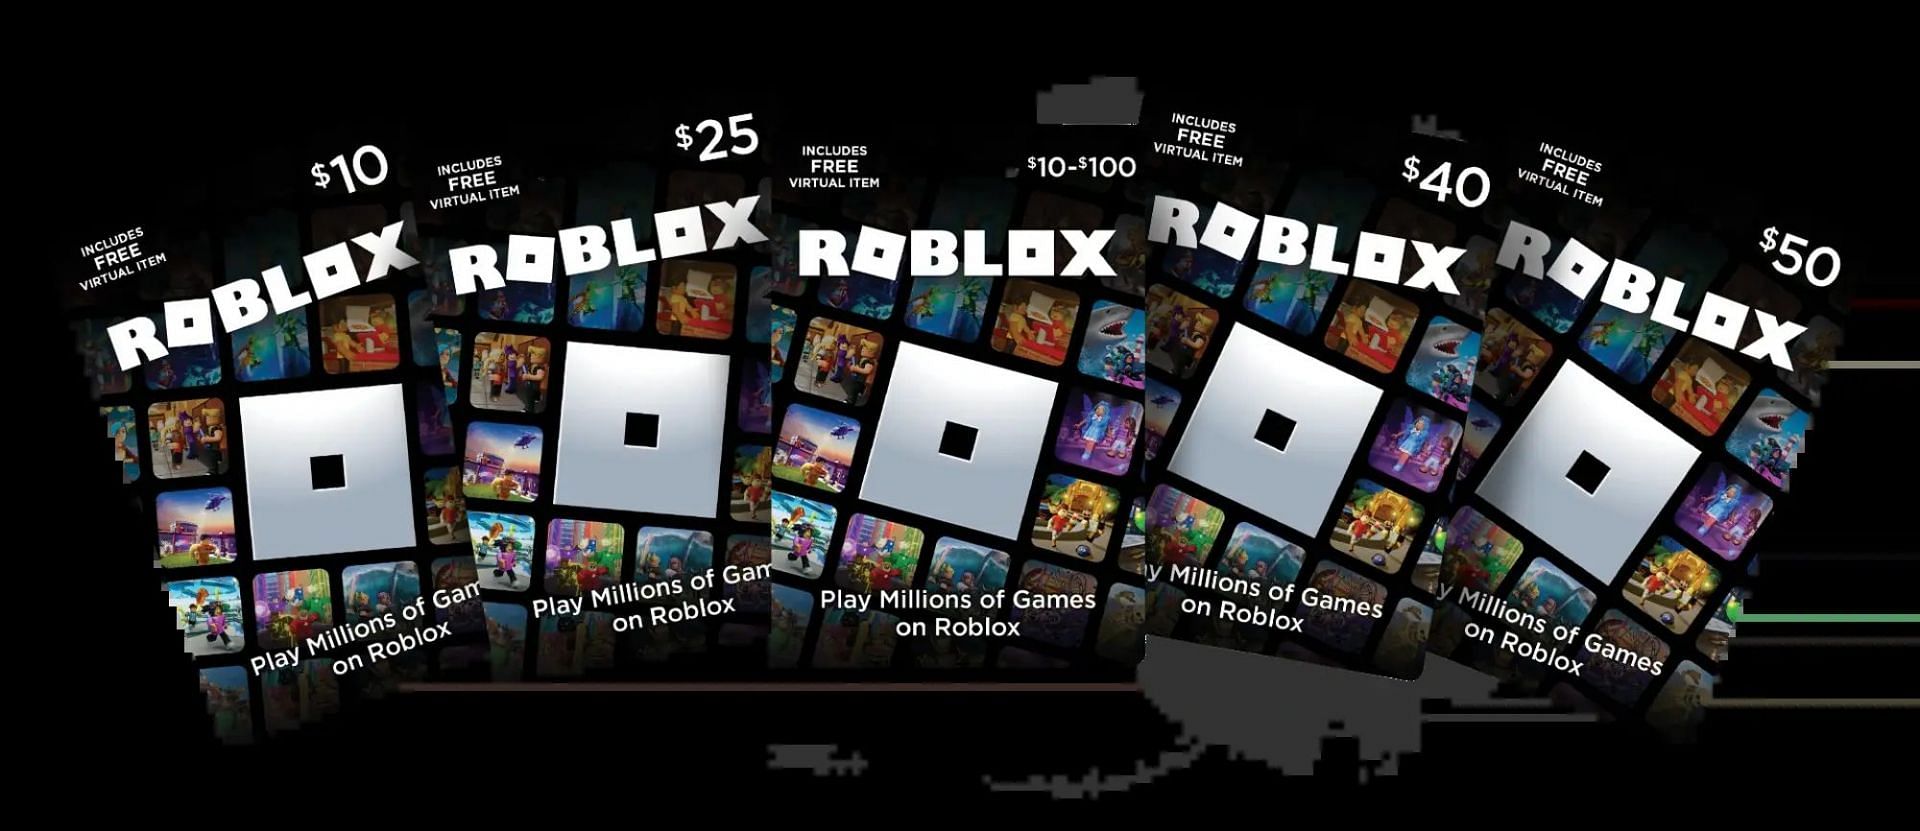 How to Redeem Codes in Roblox: A Step-by-Step Guide